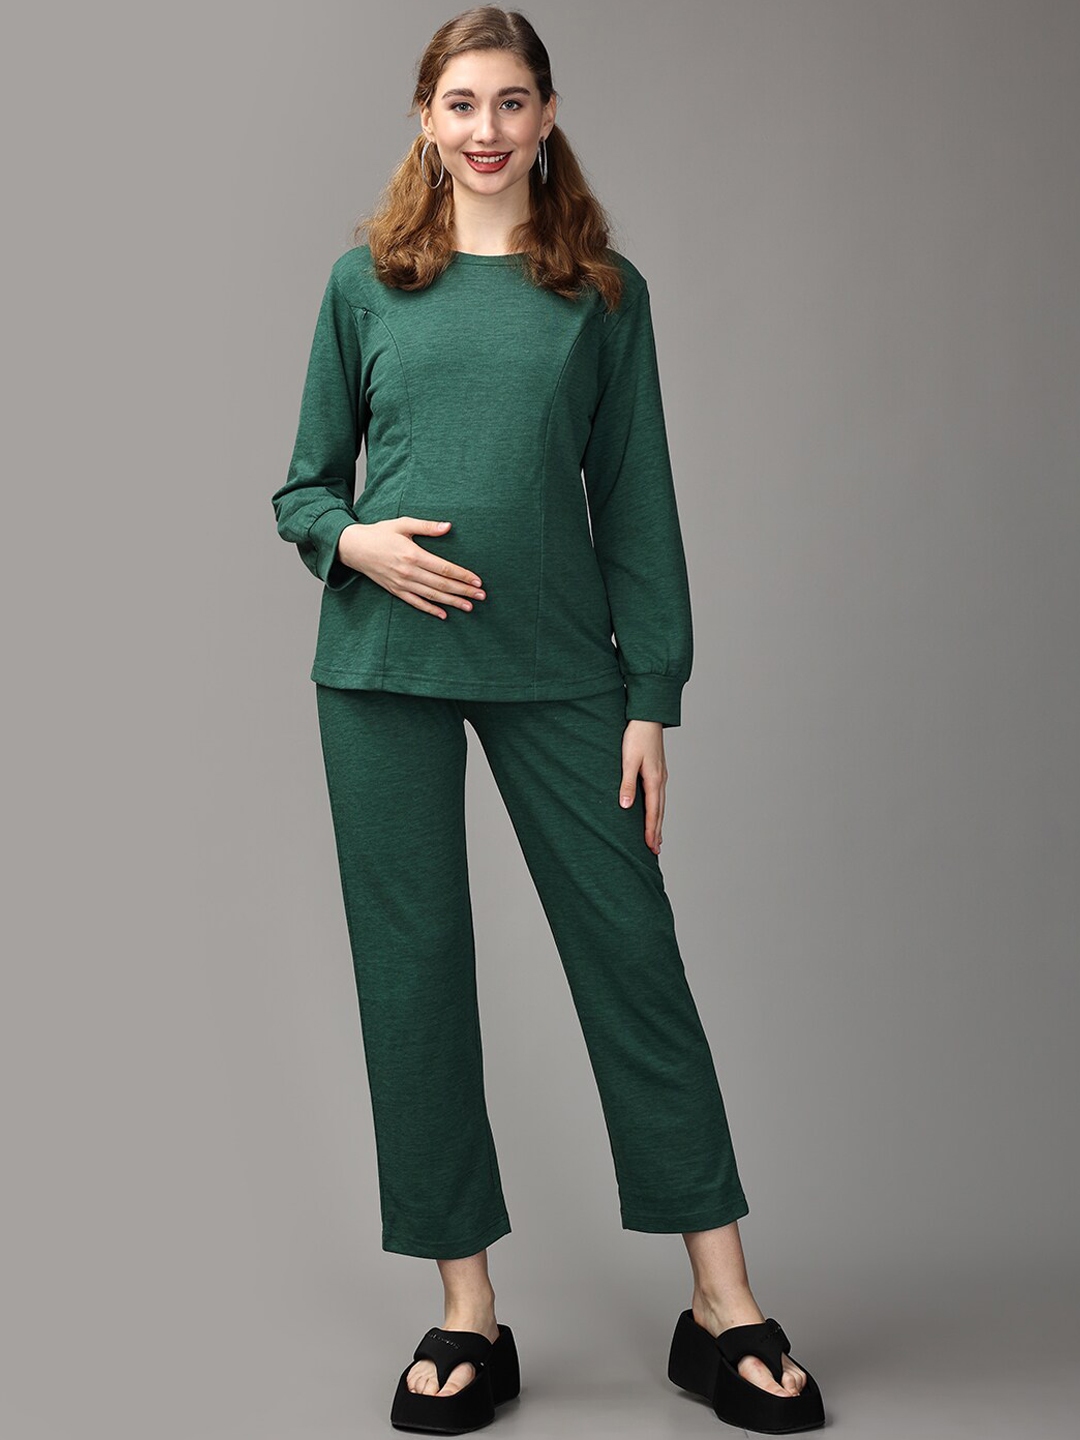 Buy The Mom Store Maternity & Nursing Pure Cotton Sweatshirt & Trouser Co  Ords - Co Ords for Women 25971384